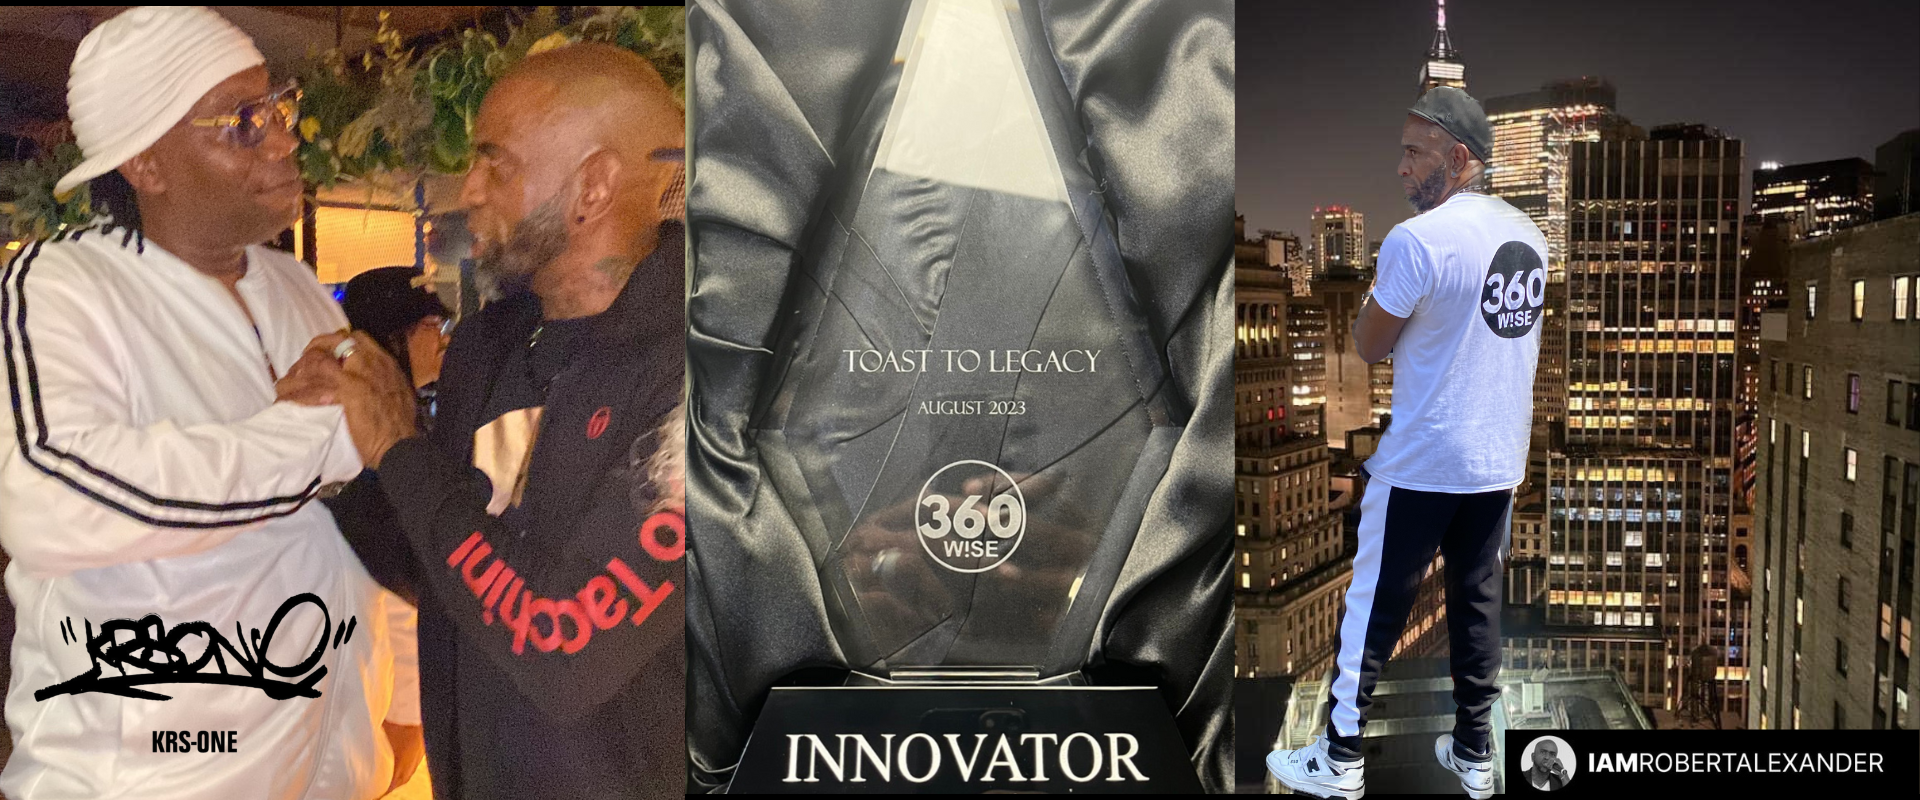 Toast To Legacy Innovator Award 2023 (NYC)- 360WiSE with HipHop Legend KRS-One